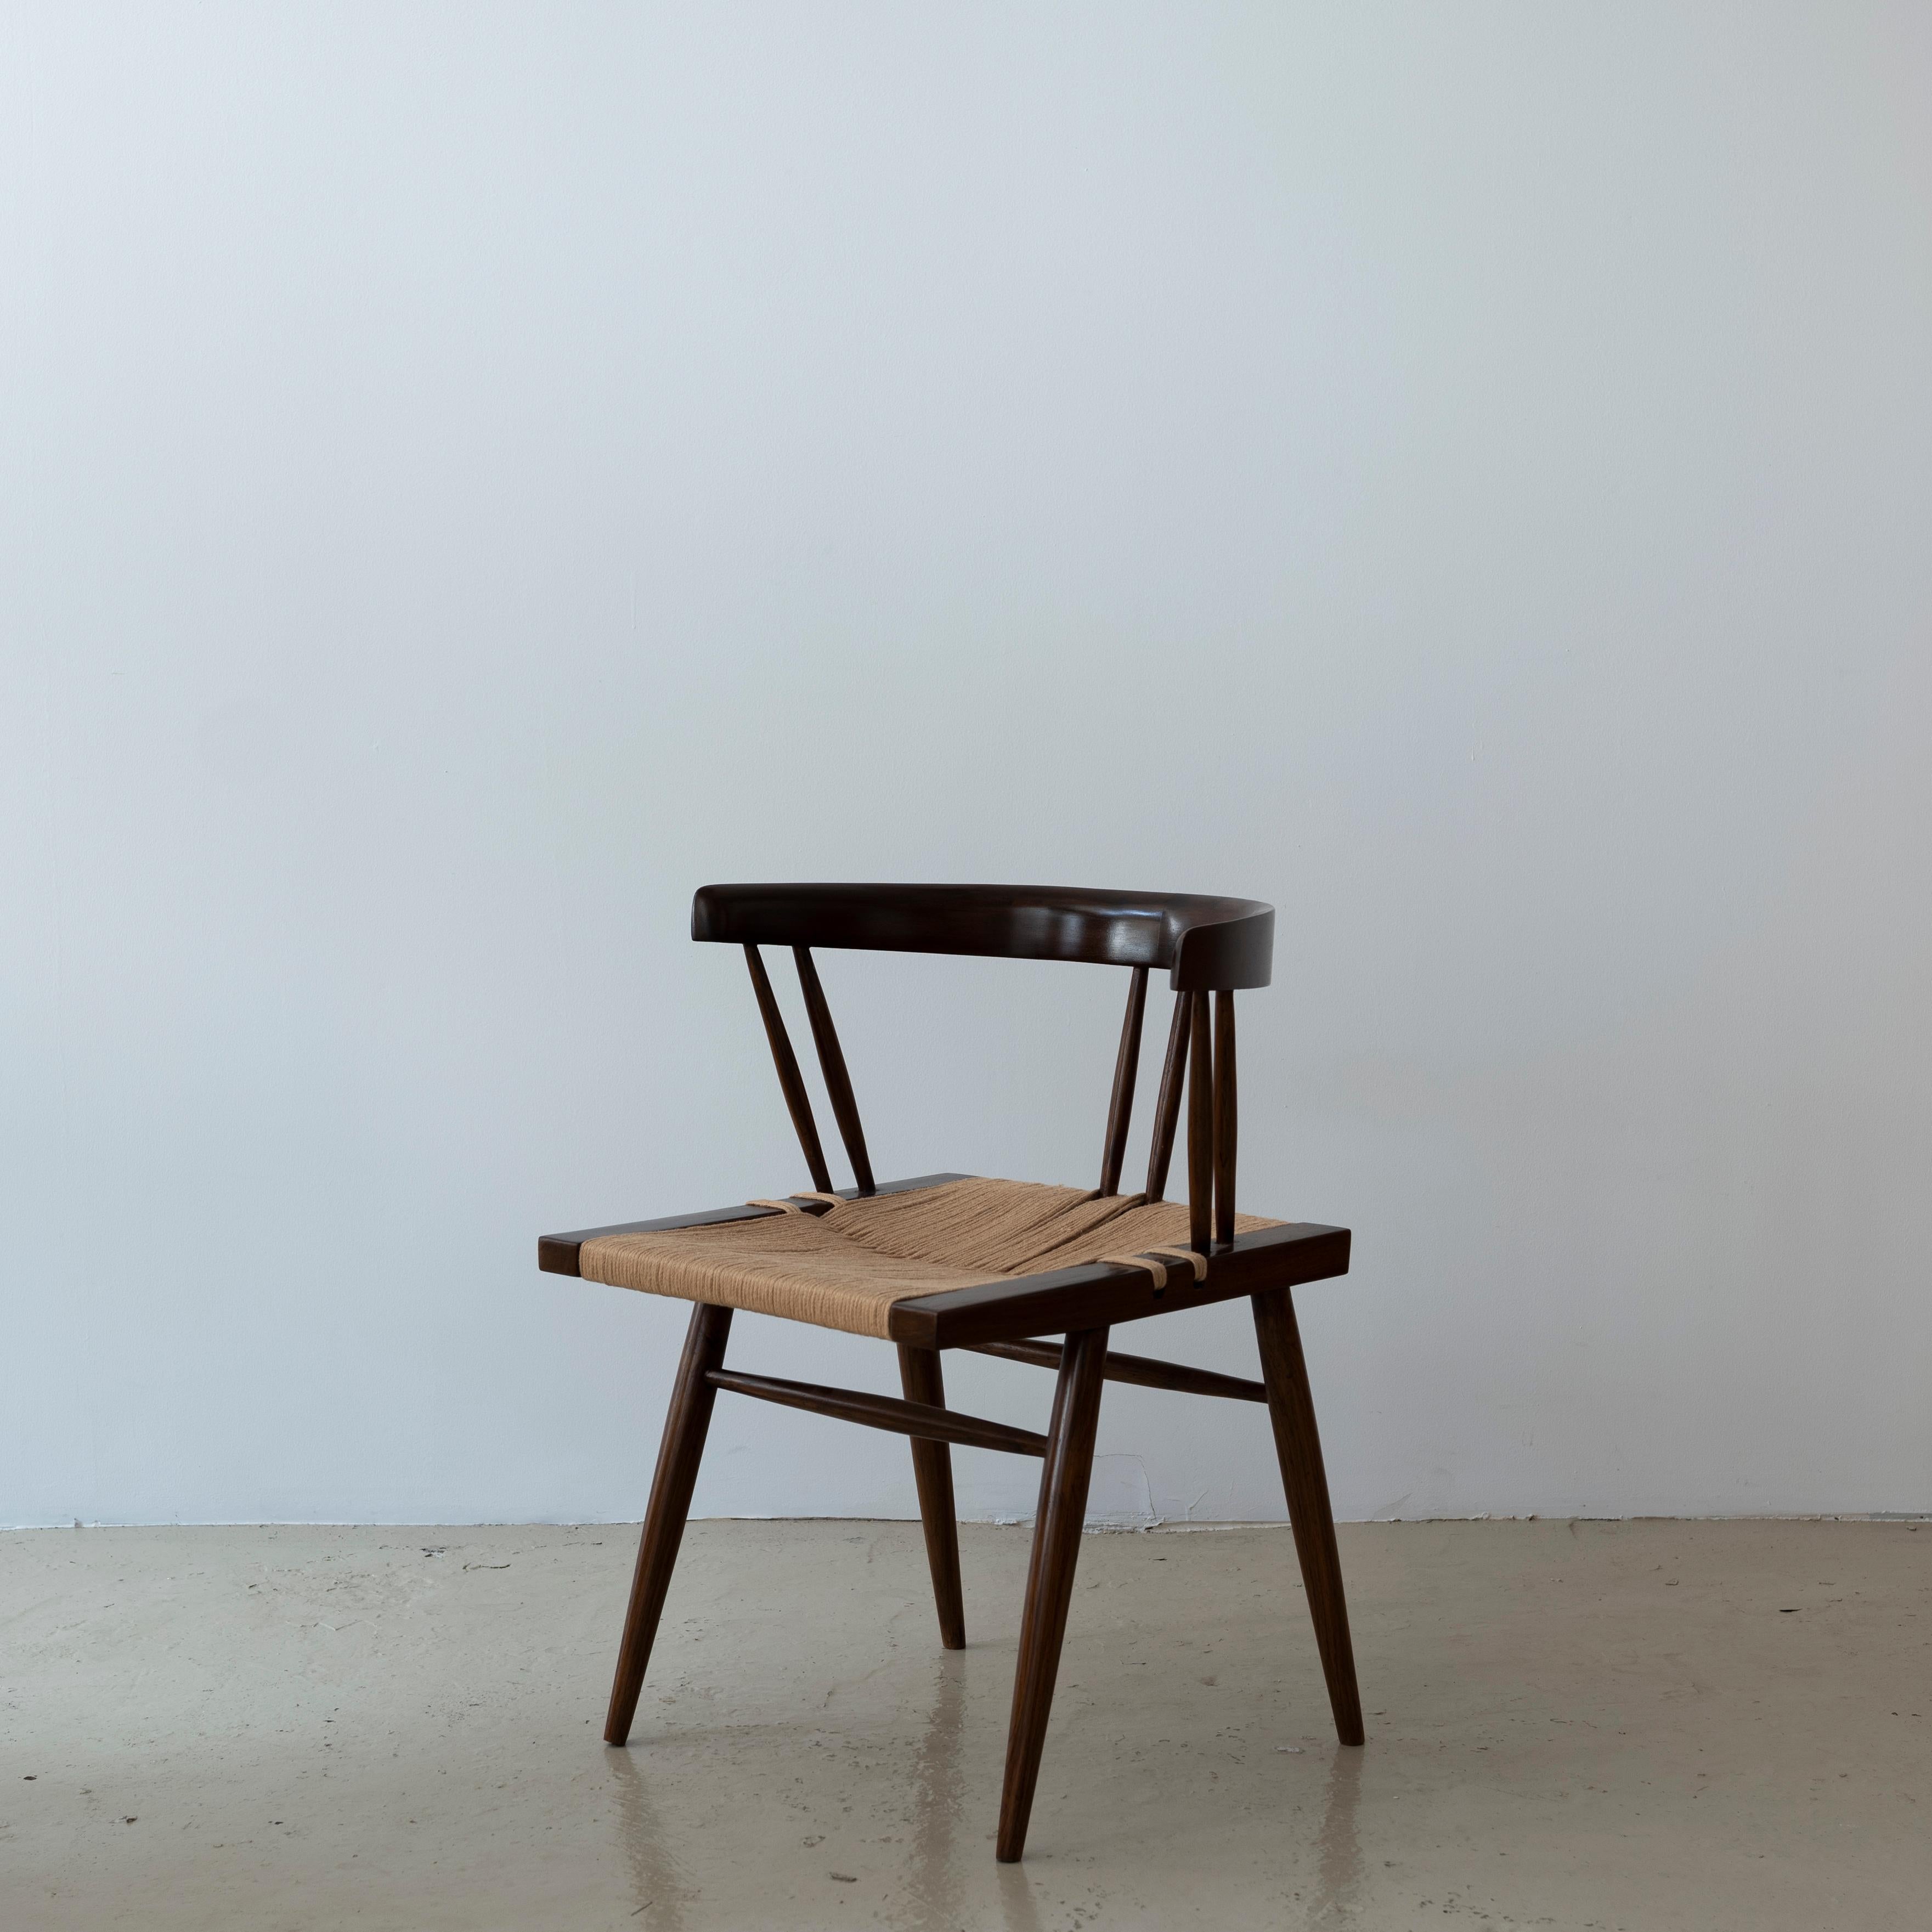 A grass-seated dining chair that designed by Japanese-American woodworker and architect George Nakashima.
He left the design and the drawings of 32 kinds of furniture while following his previous design when he visited NID (National Institute of